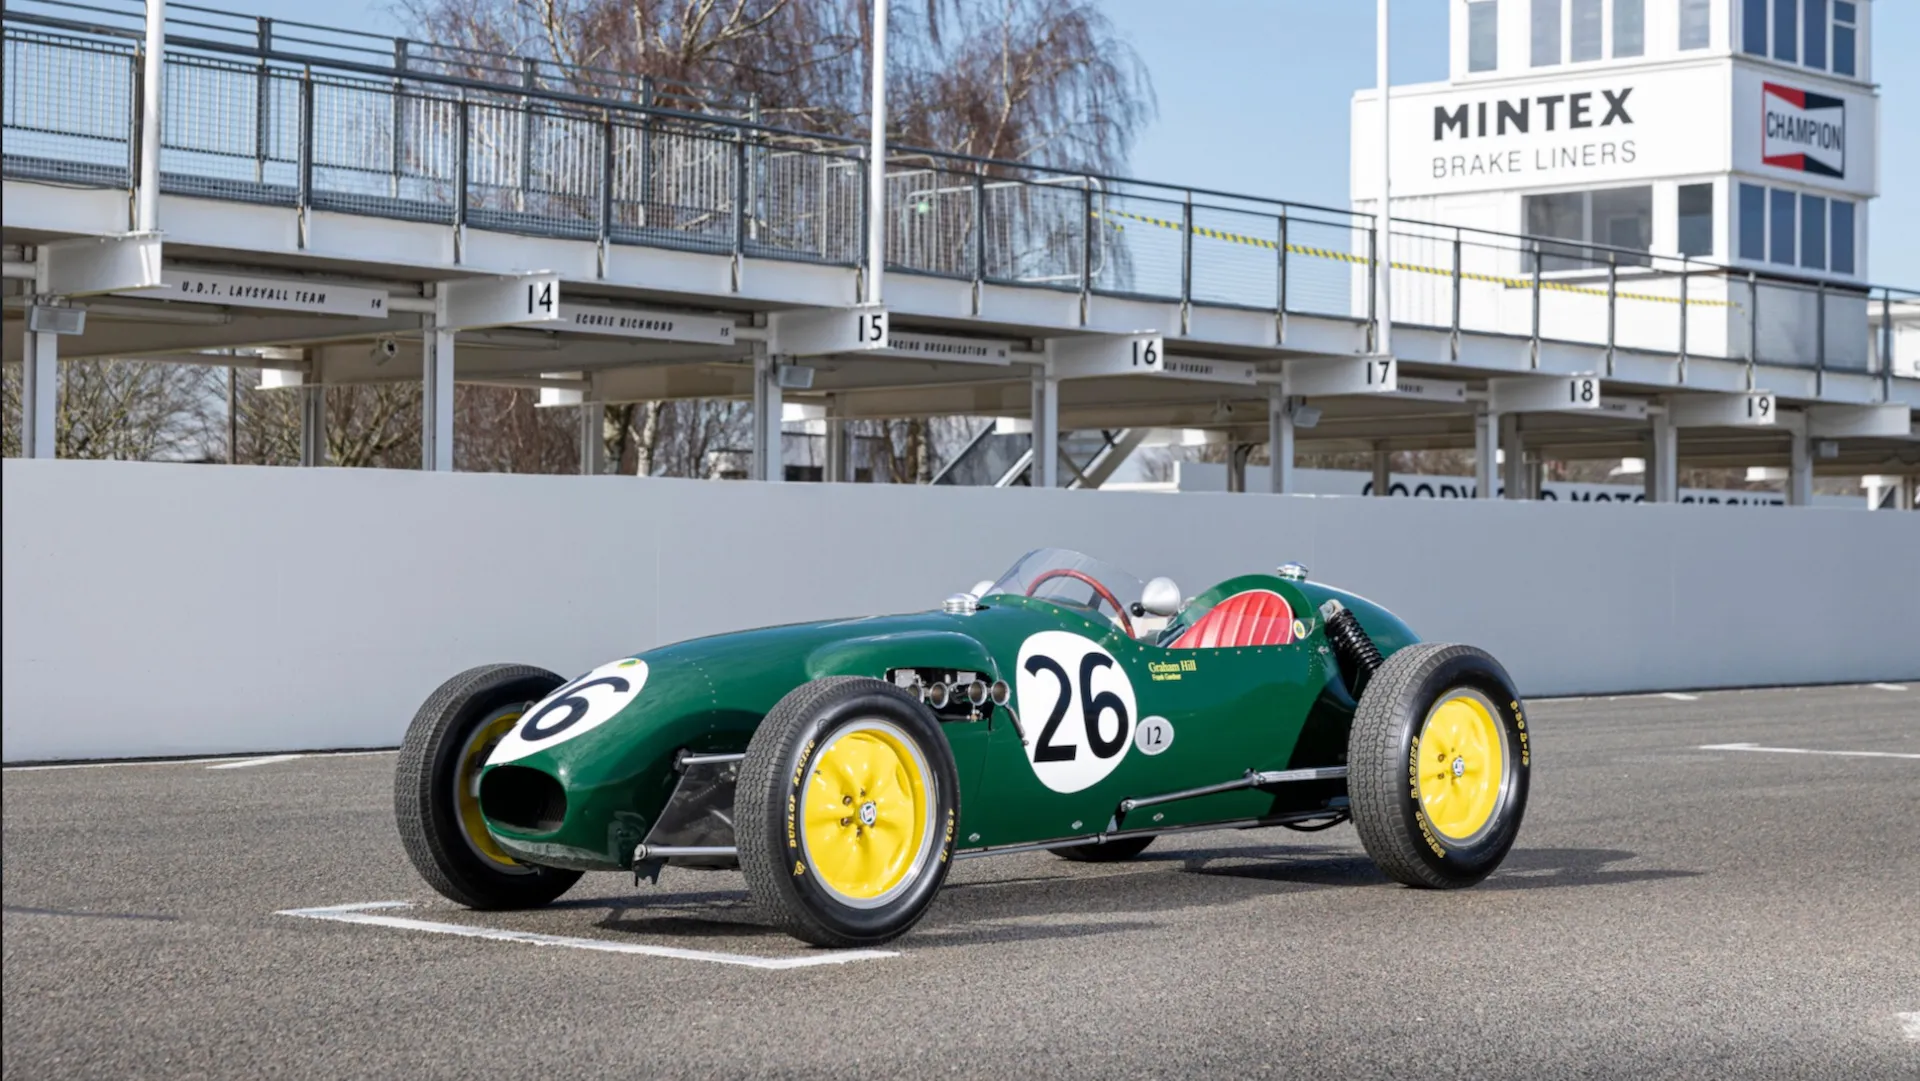 Lotus' First F1 Racing Car to be Auctioned